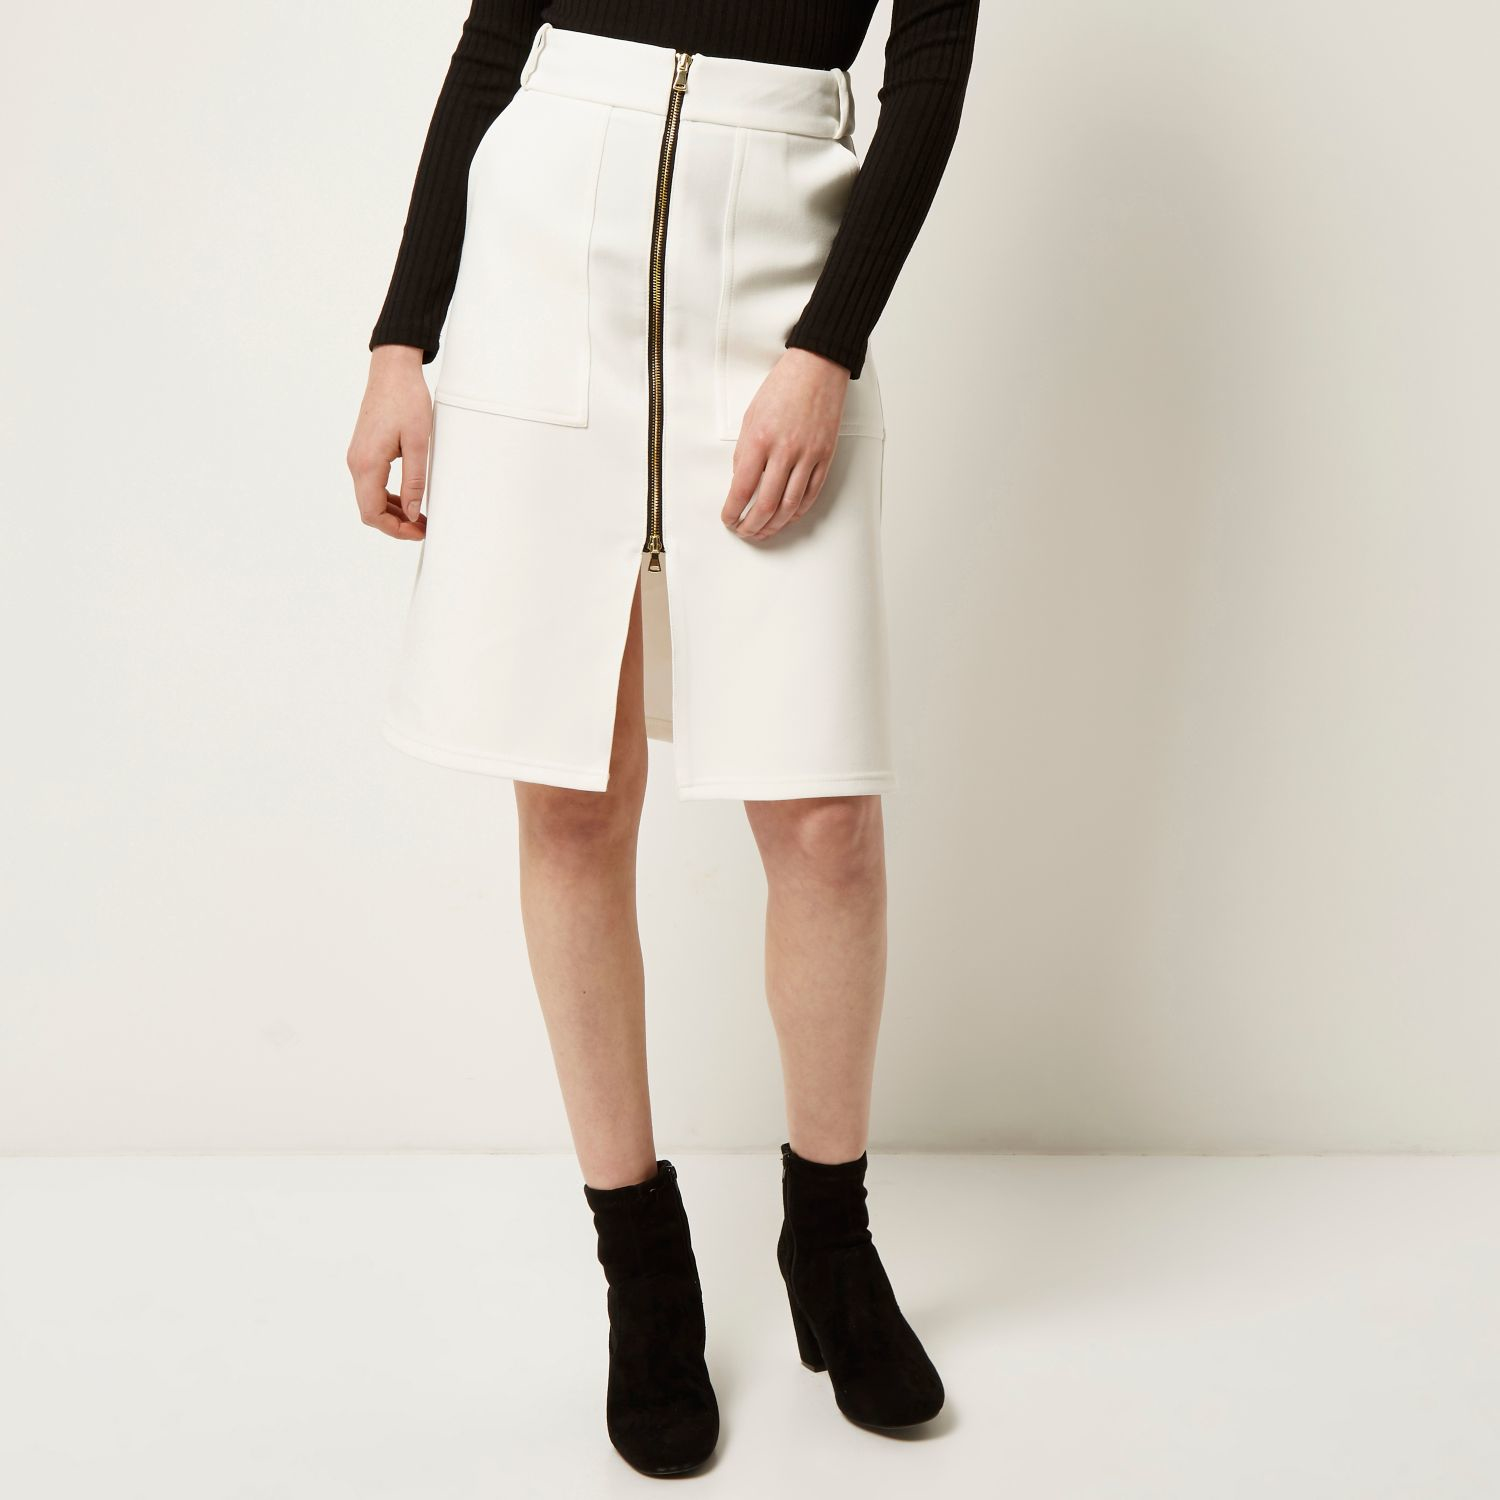 River Island Zip Front Dress - Guide Of Selecting